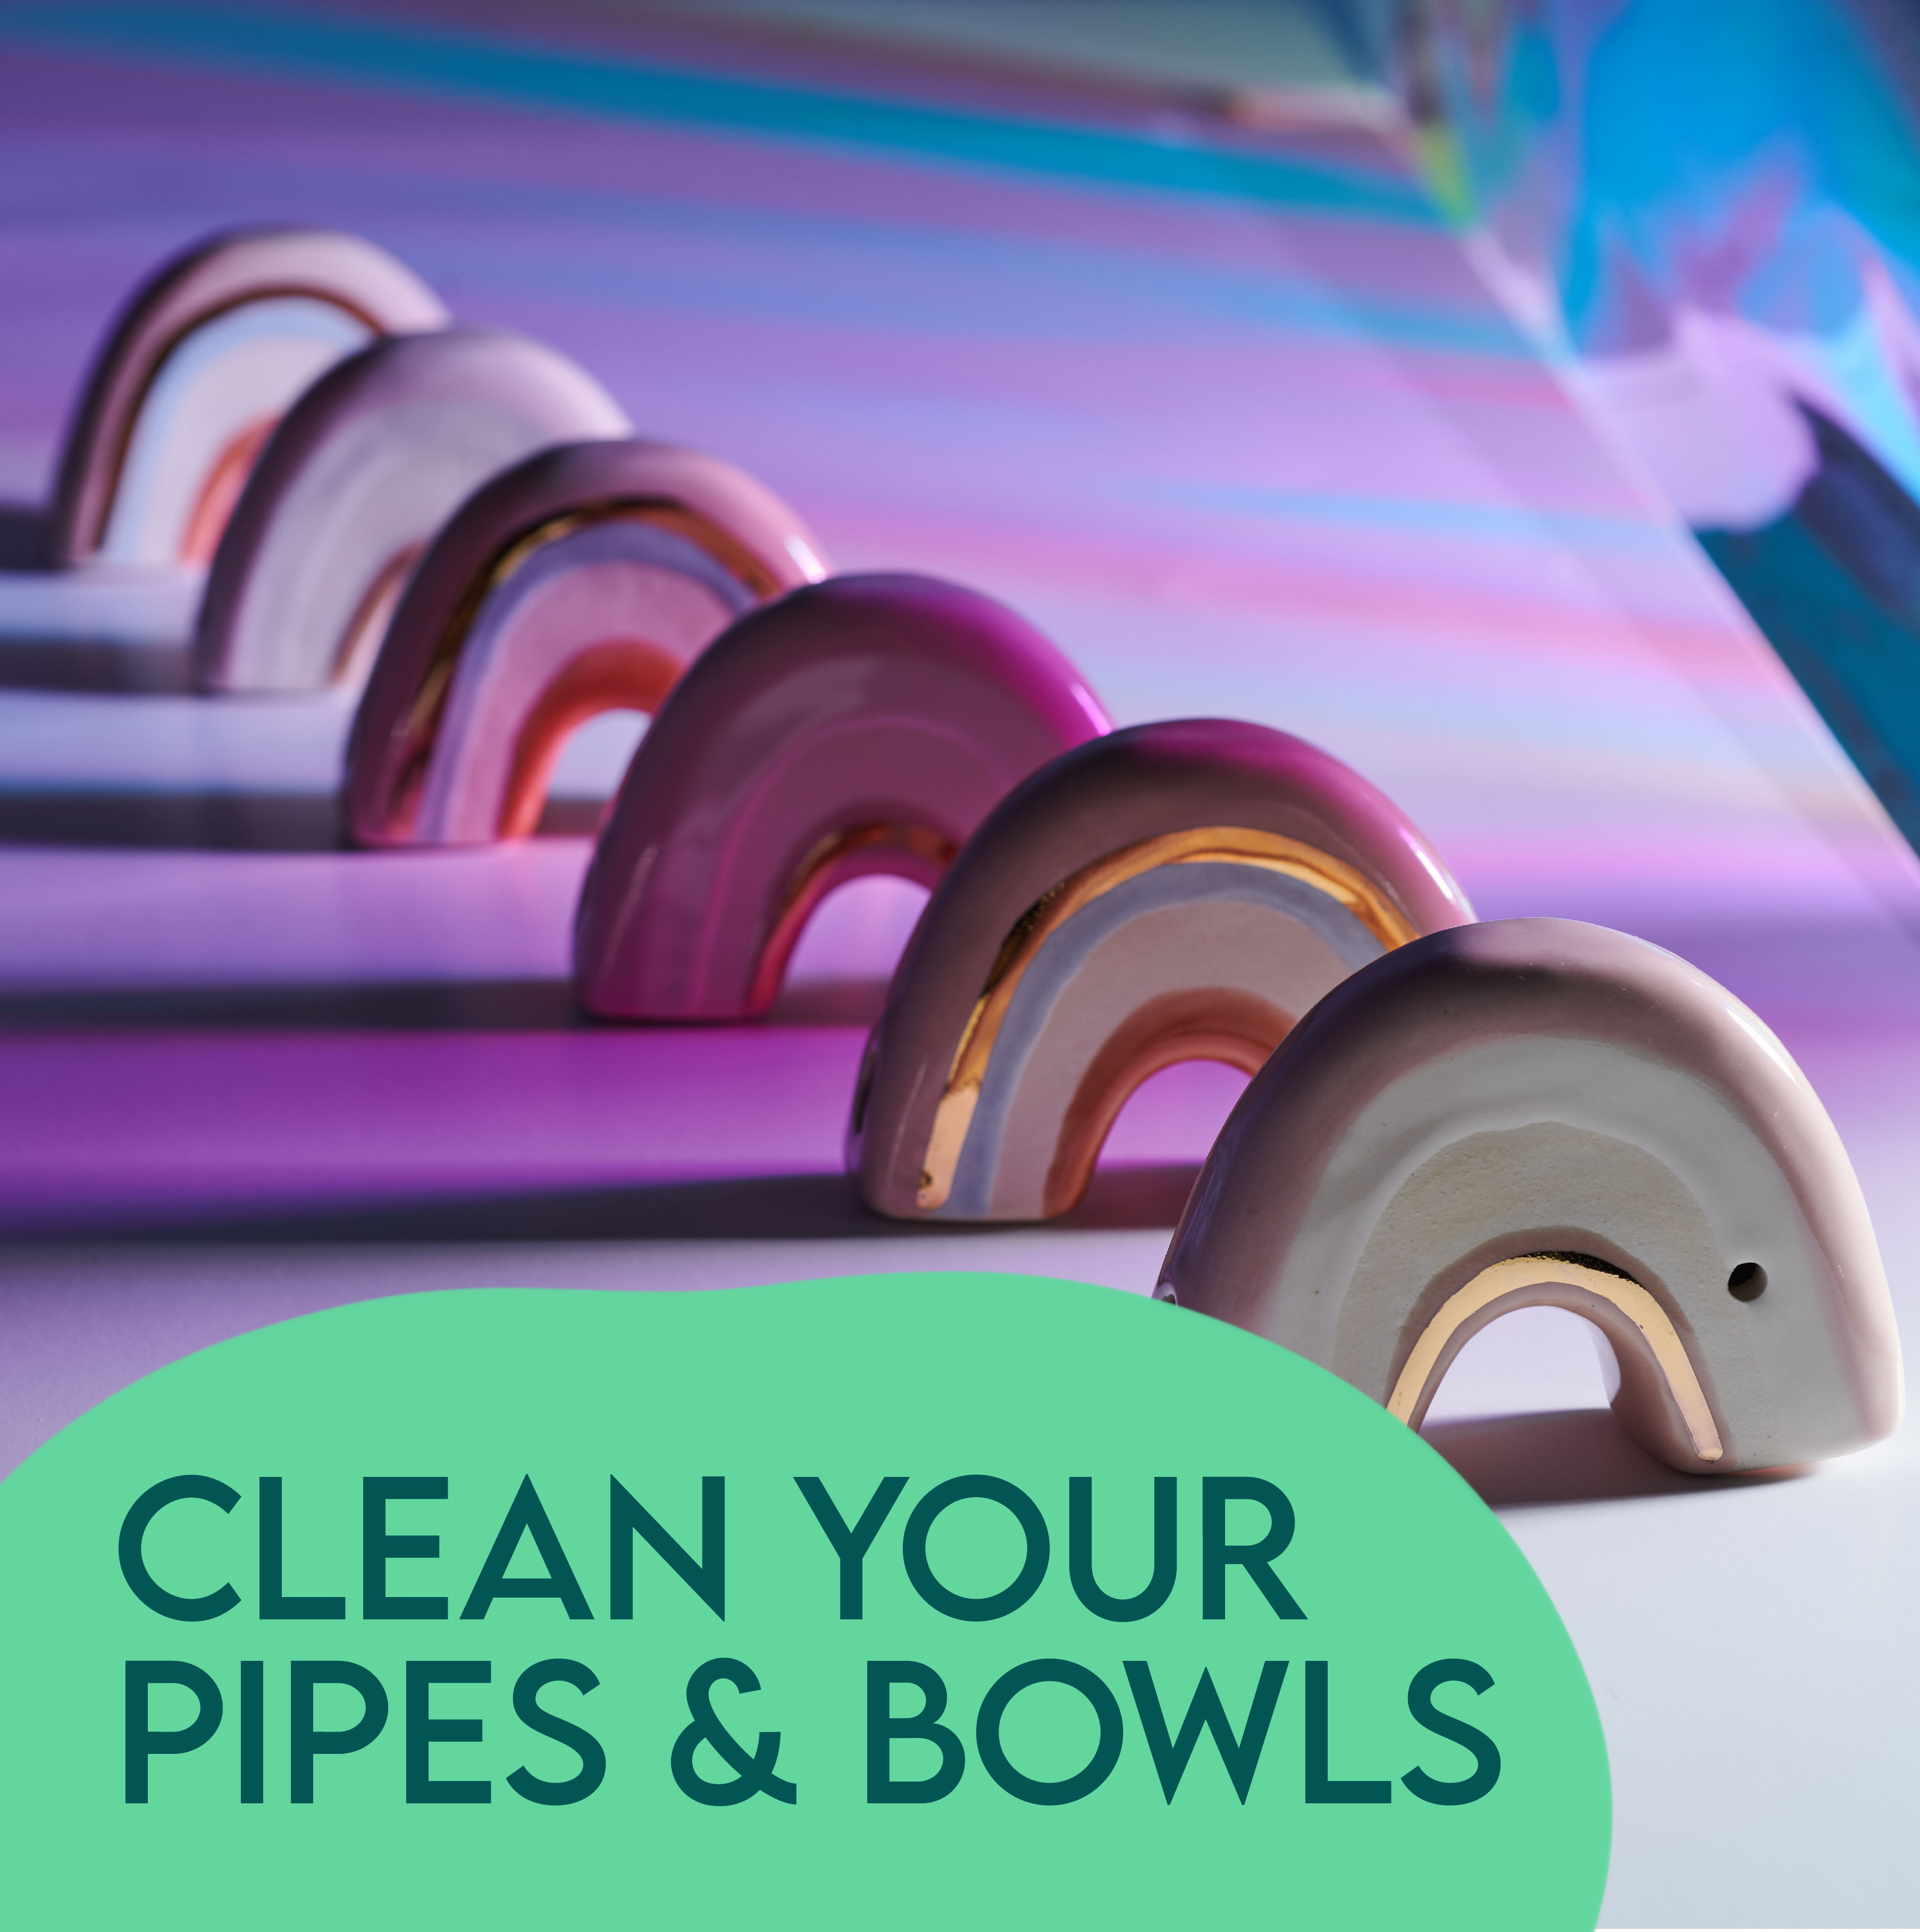 Clean Your Ceramic Pipe text with ceramic rainbow pipes in background